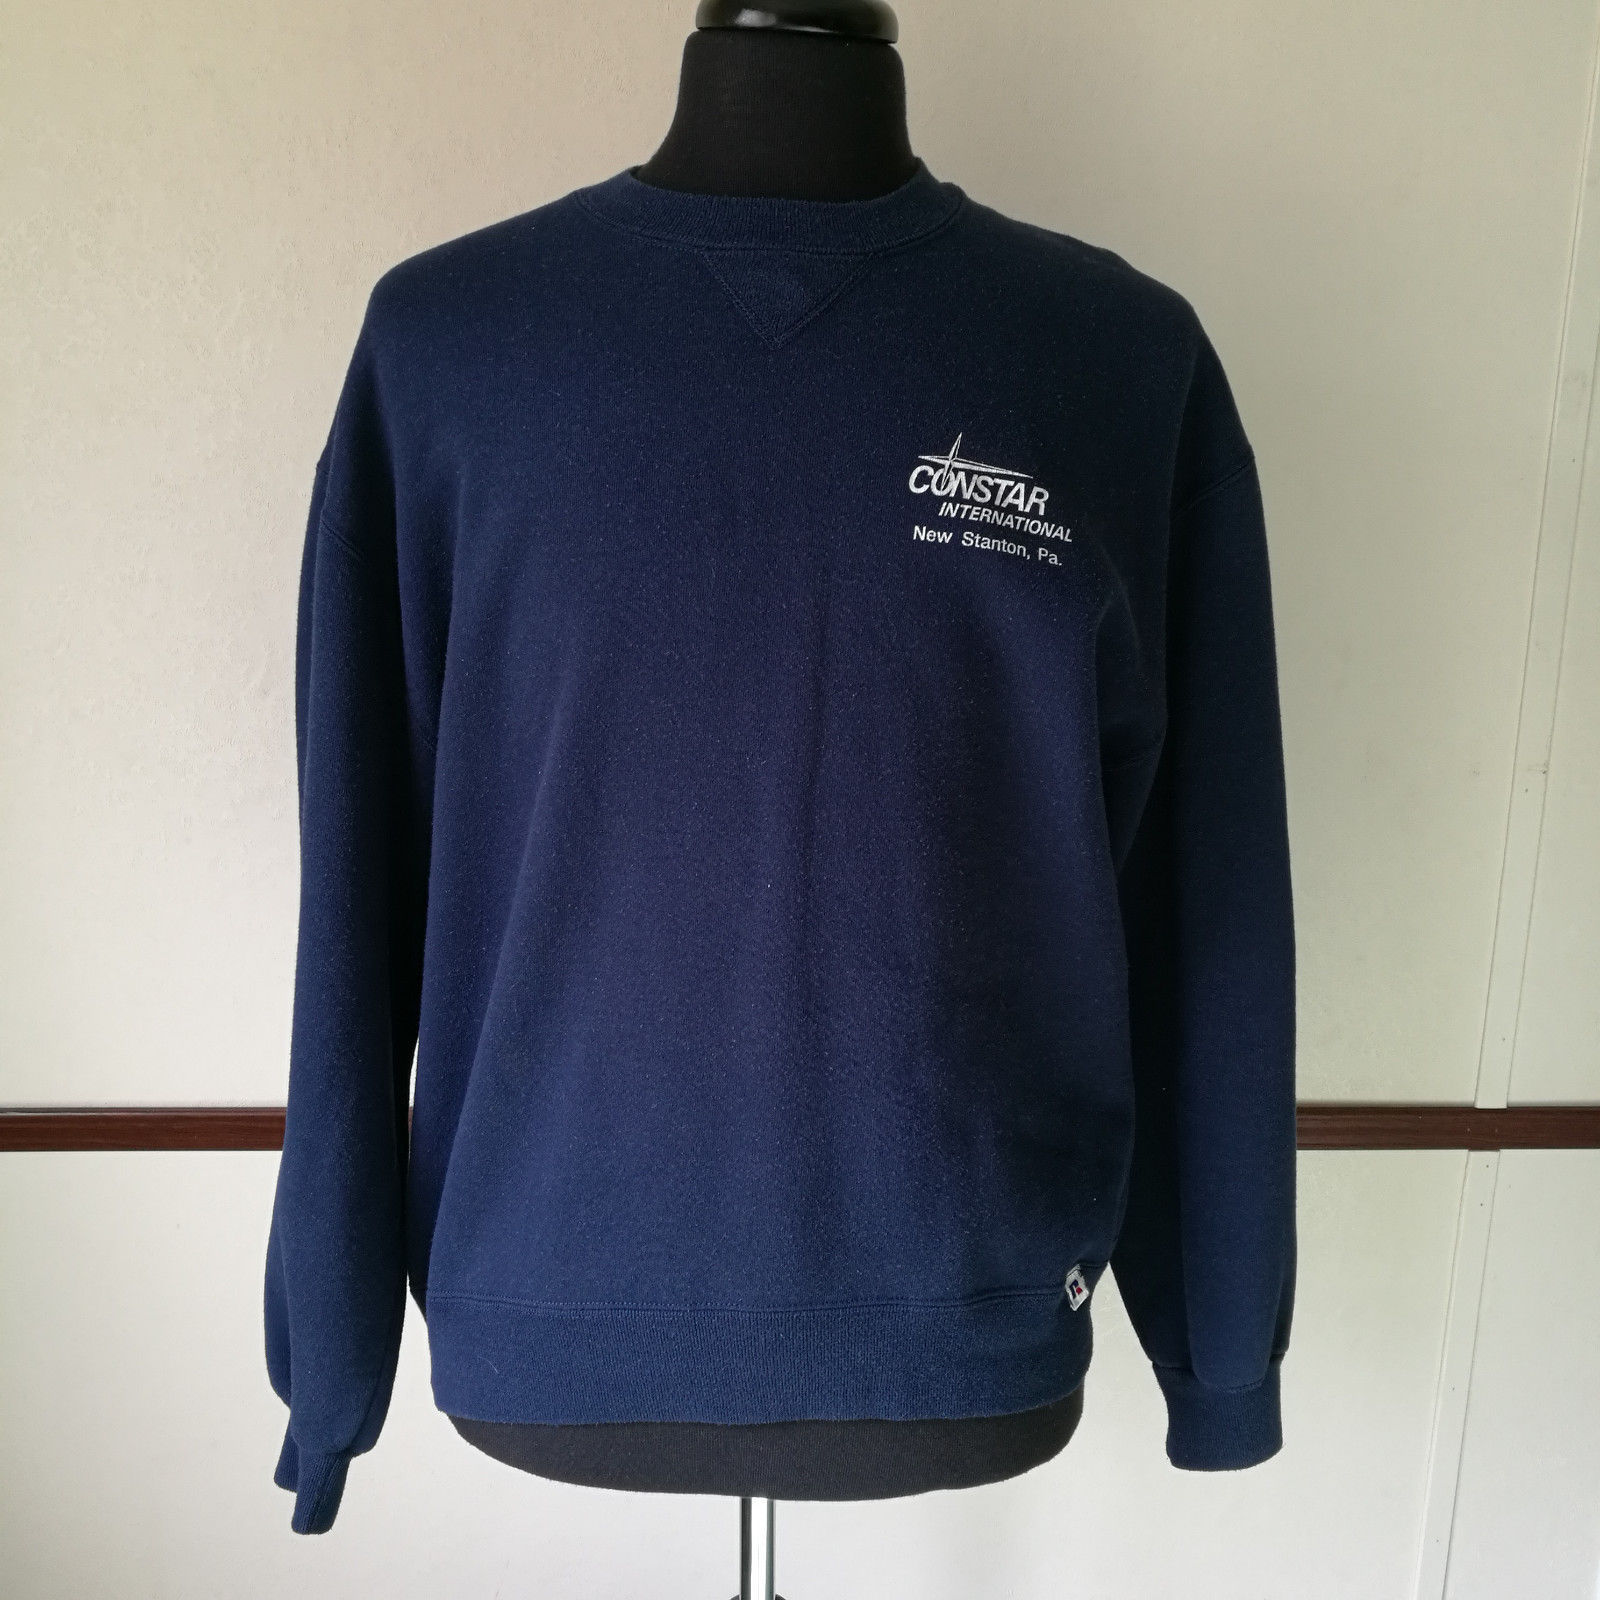 Primary image for Vintage Russell Constar Financial Sweatshirt Blue Size Large Made in USA